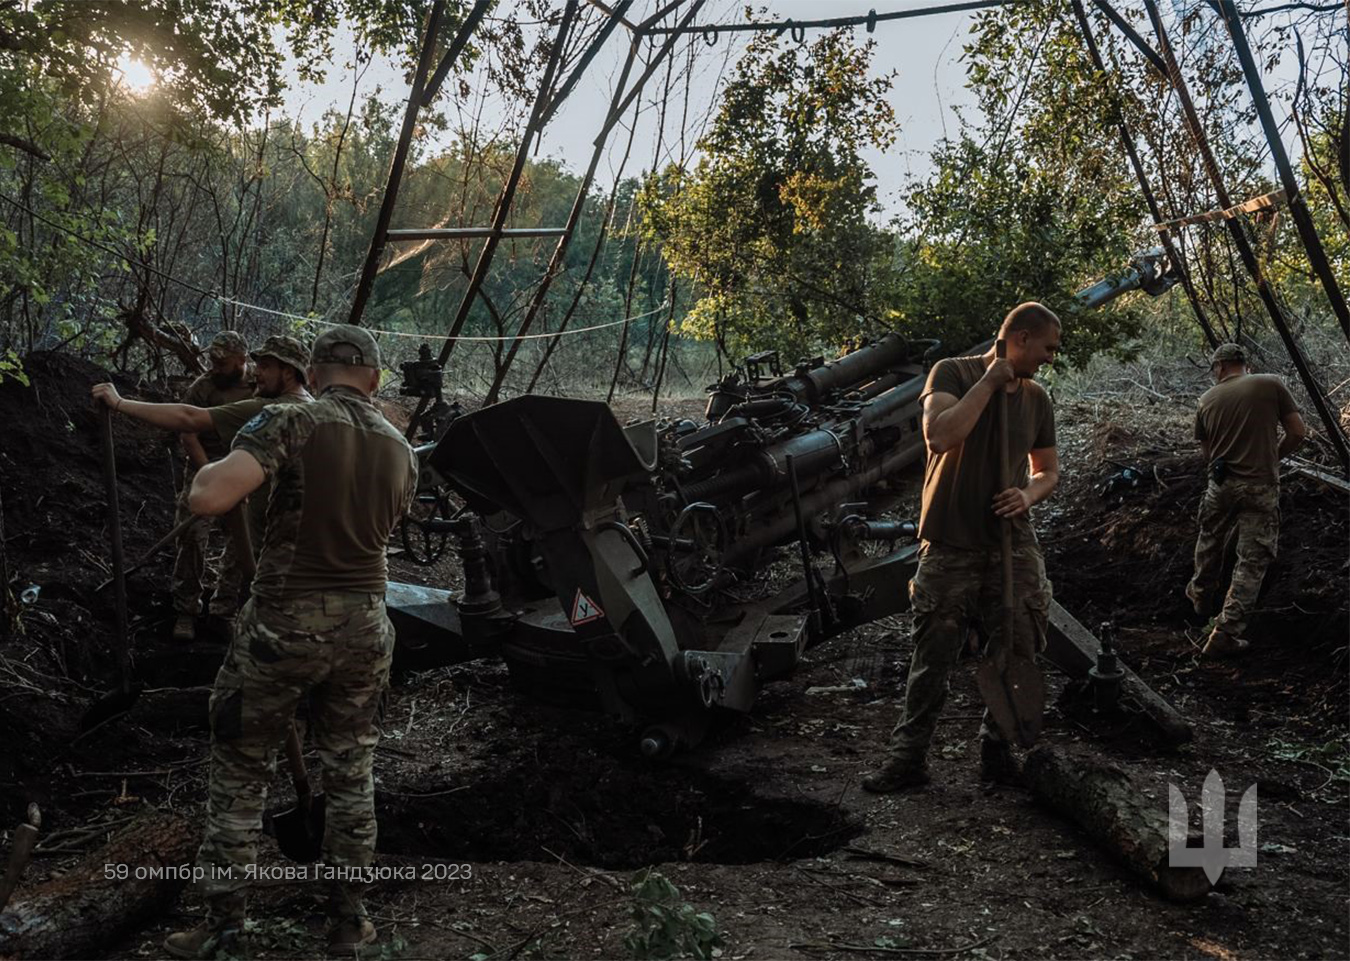 Commander Says There Is Progress and Success in Tavria Direction, Artillerymen of the 59th Motorized Brigade of the Ukrainian Ground Forces, Defense Forces